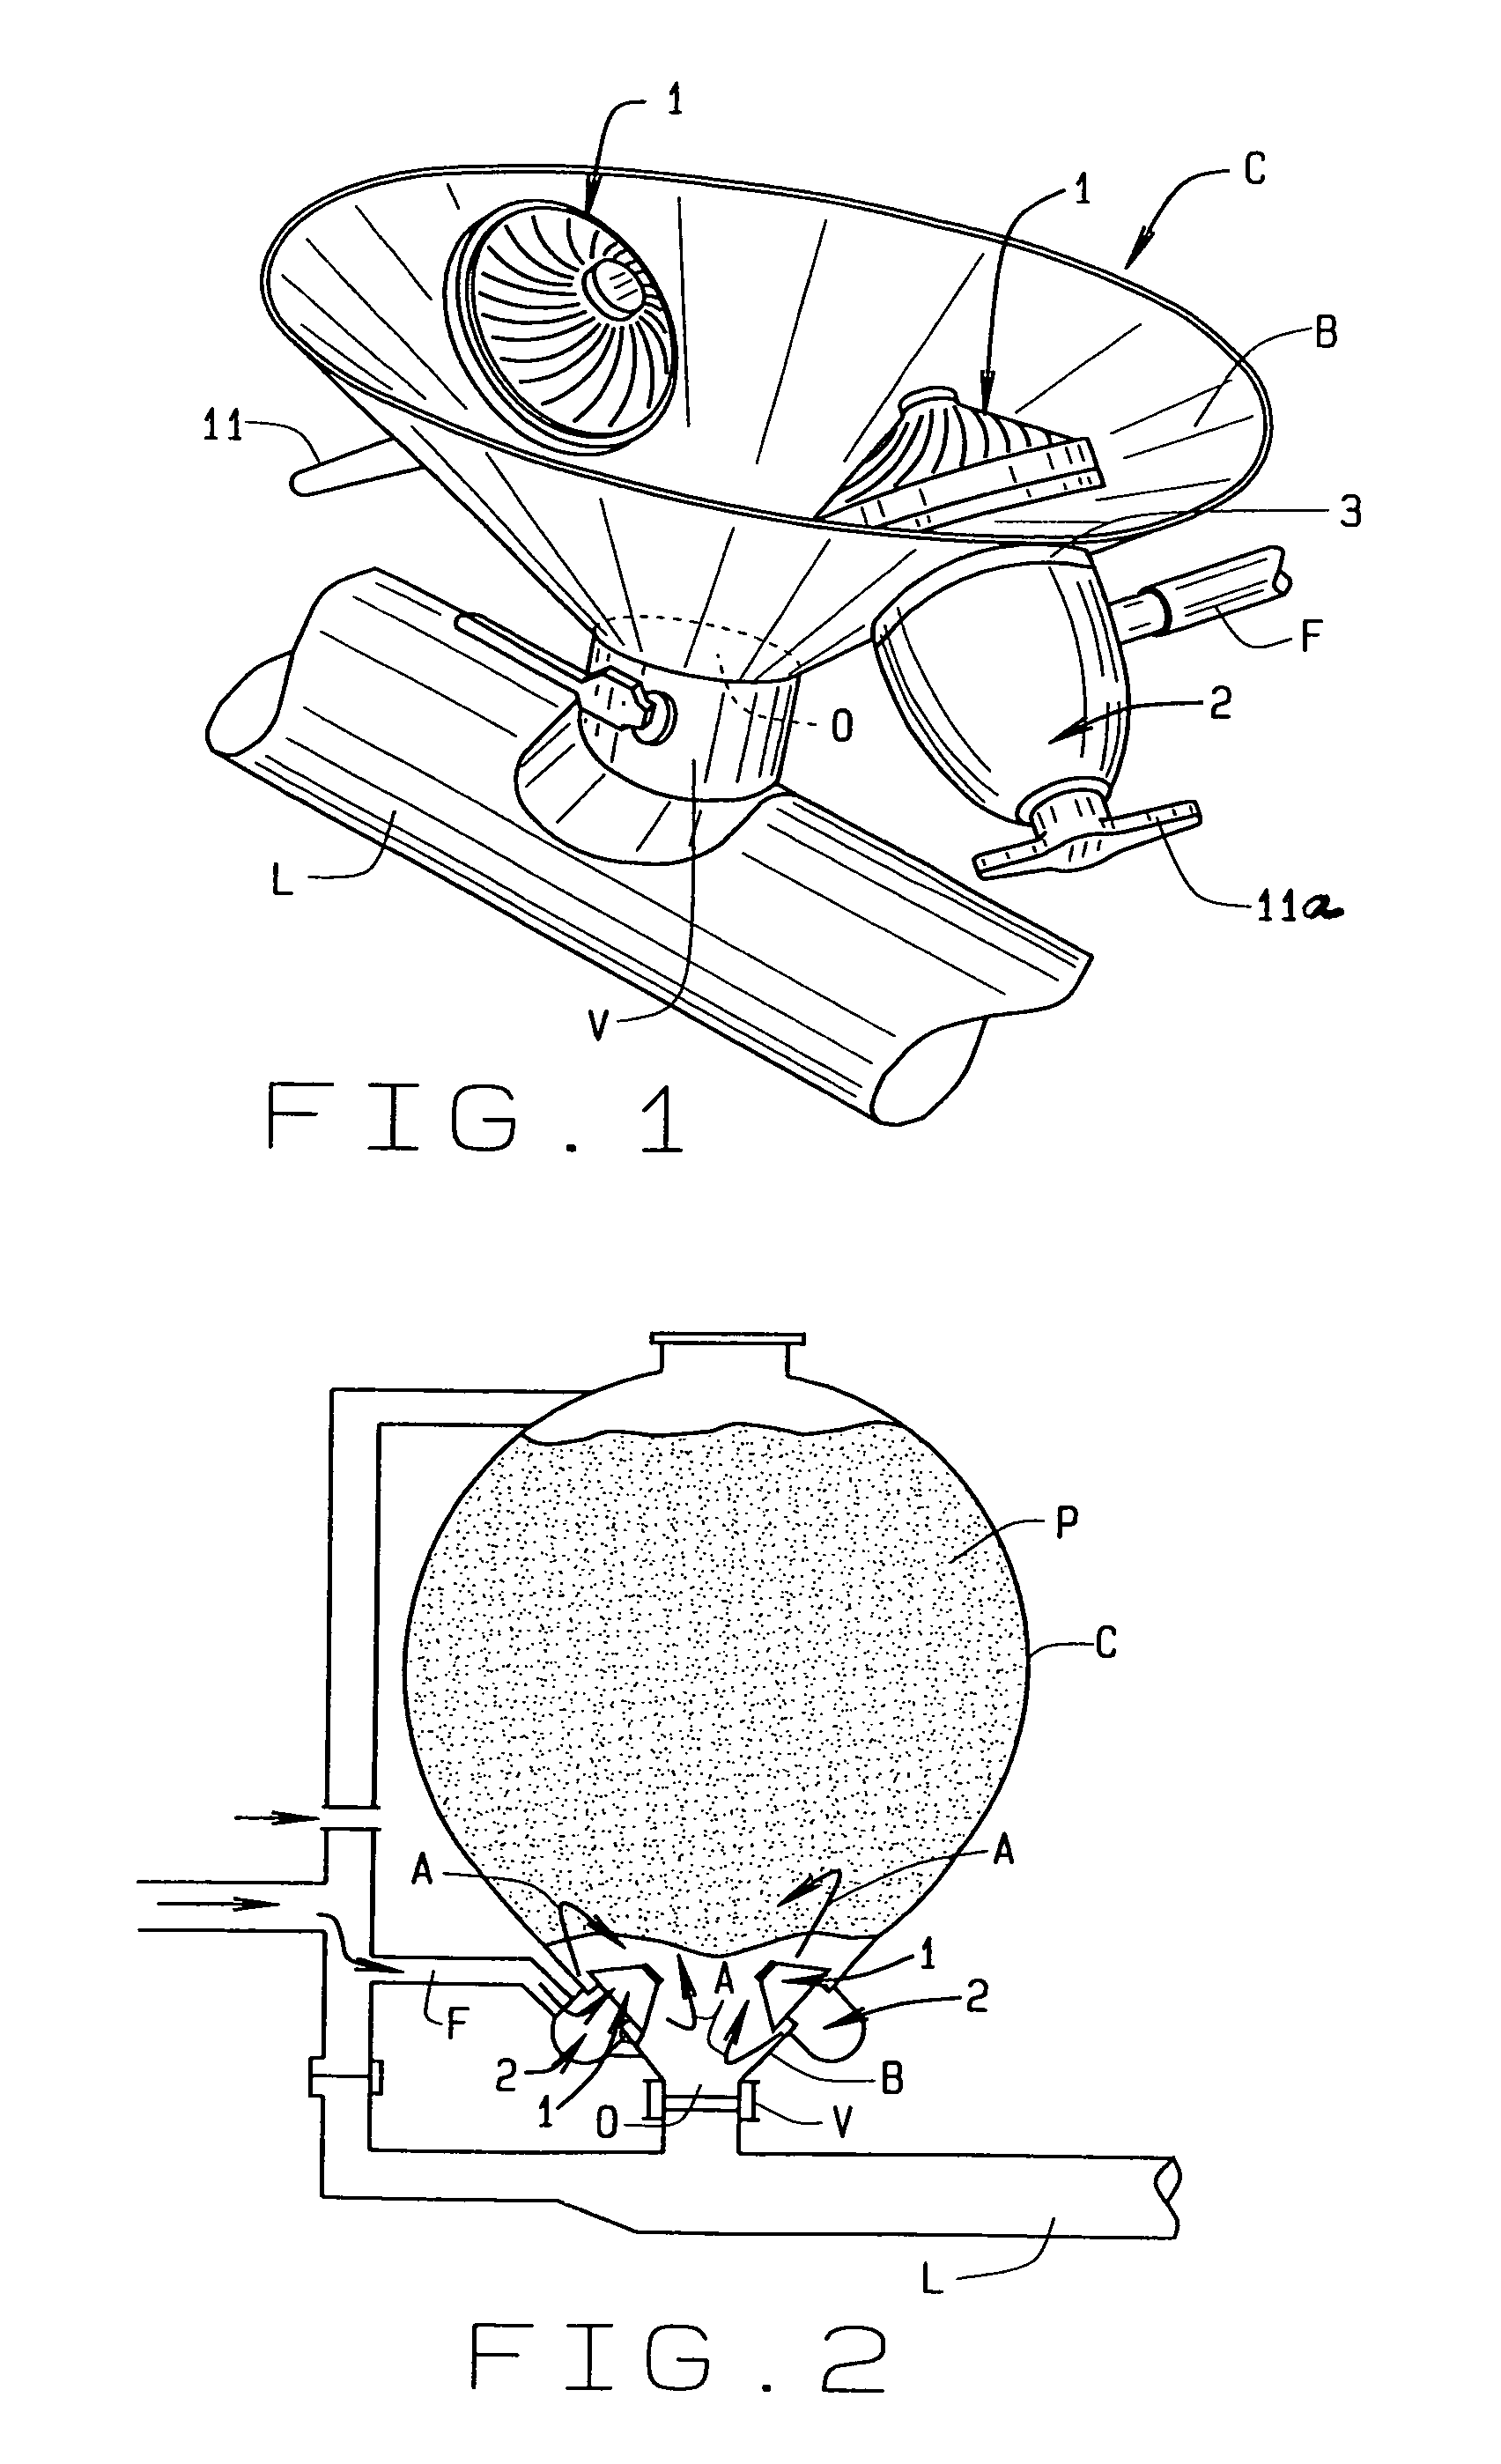 Aerator device inducing cyclonic flow